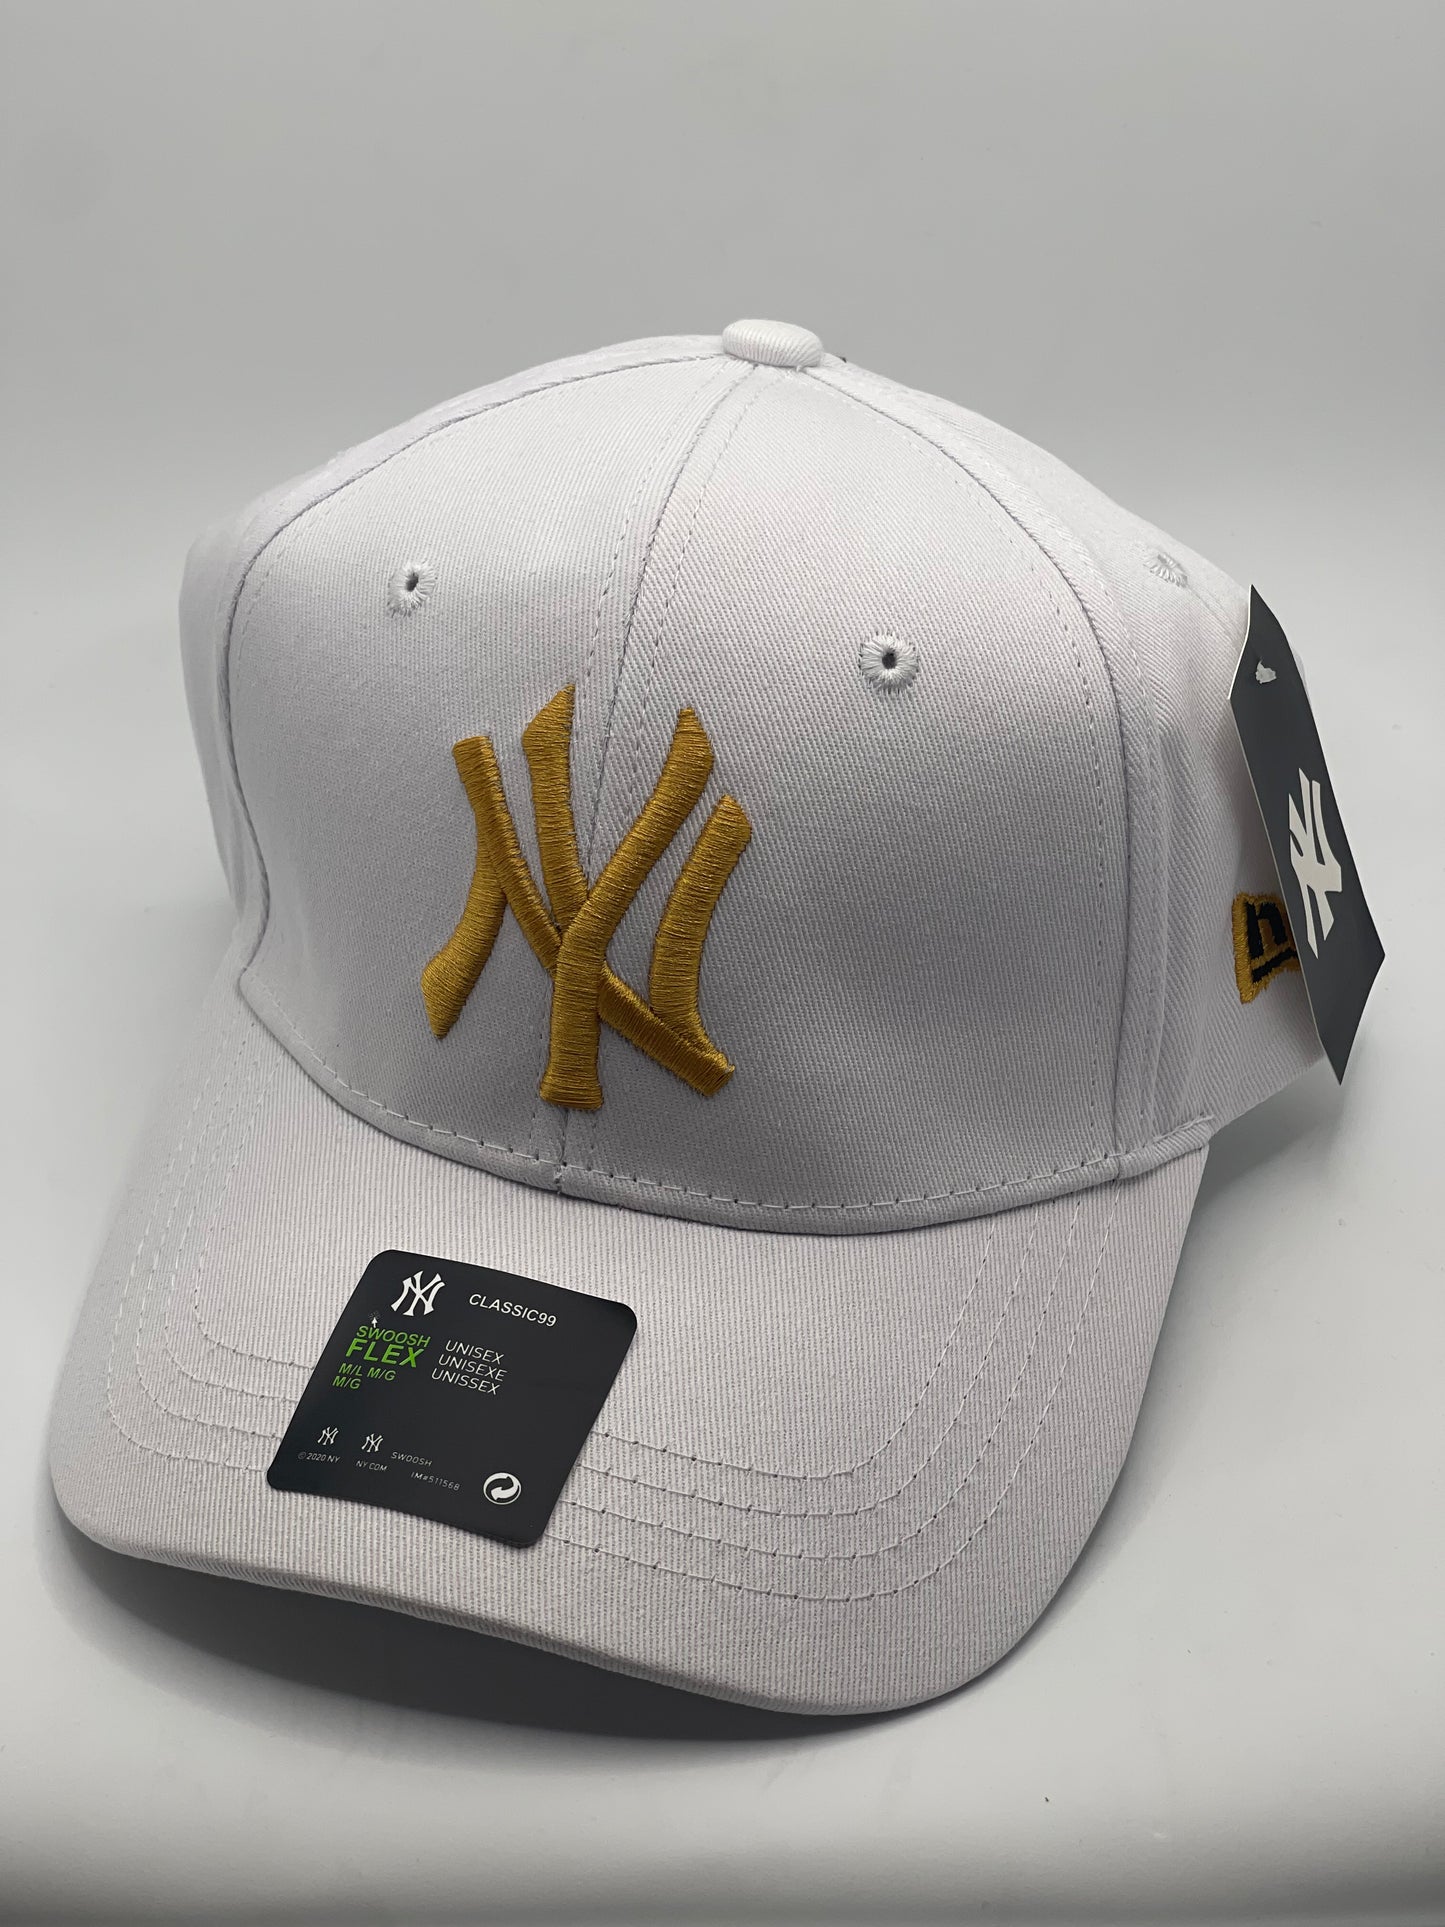 Classic99 Ny hat | Tophats SWOOSH – You Look Crave - the FLEX UNISEX Get